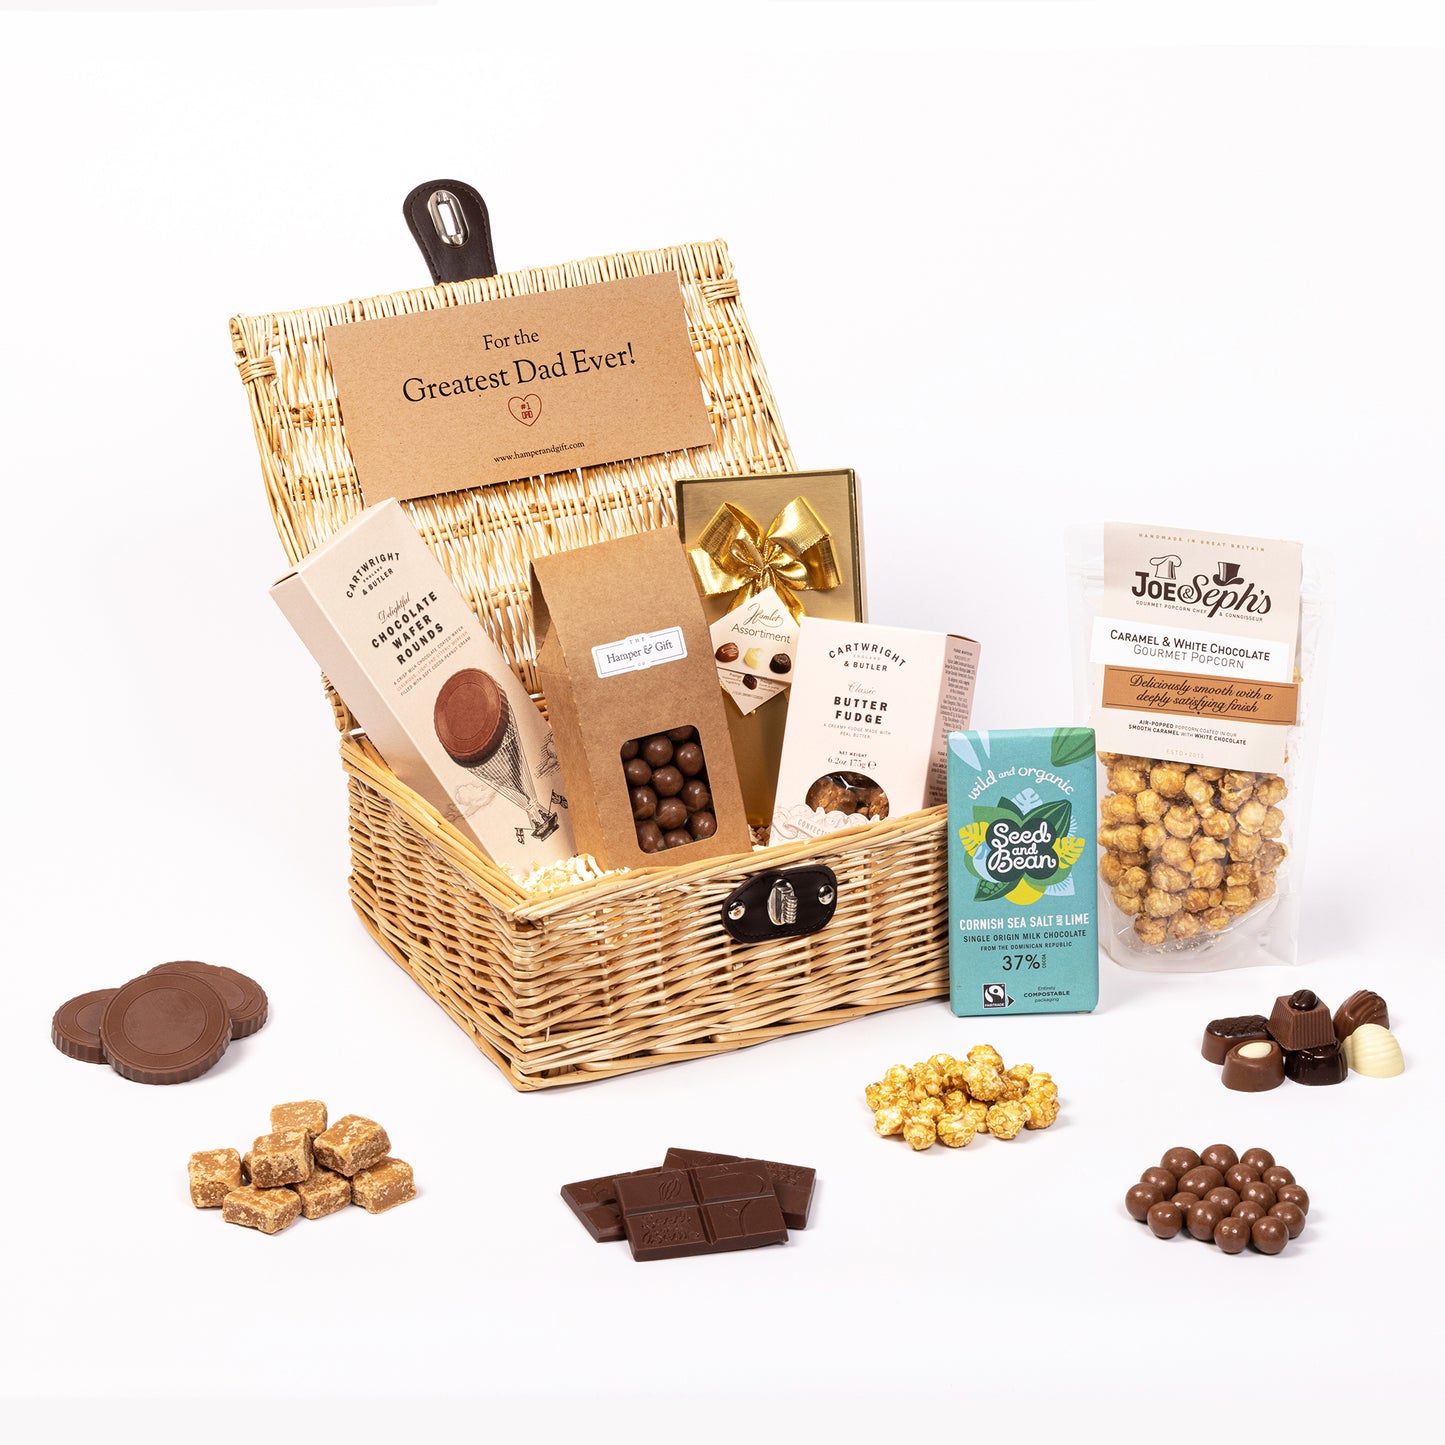 Greatest Dad Chocolate & Fudge Hamper filled with a variety of chocolate, fudge, biscuit and gourmet popcorn